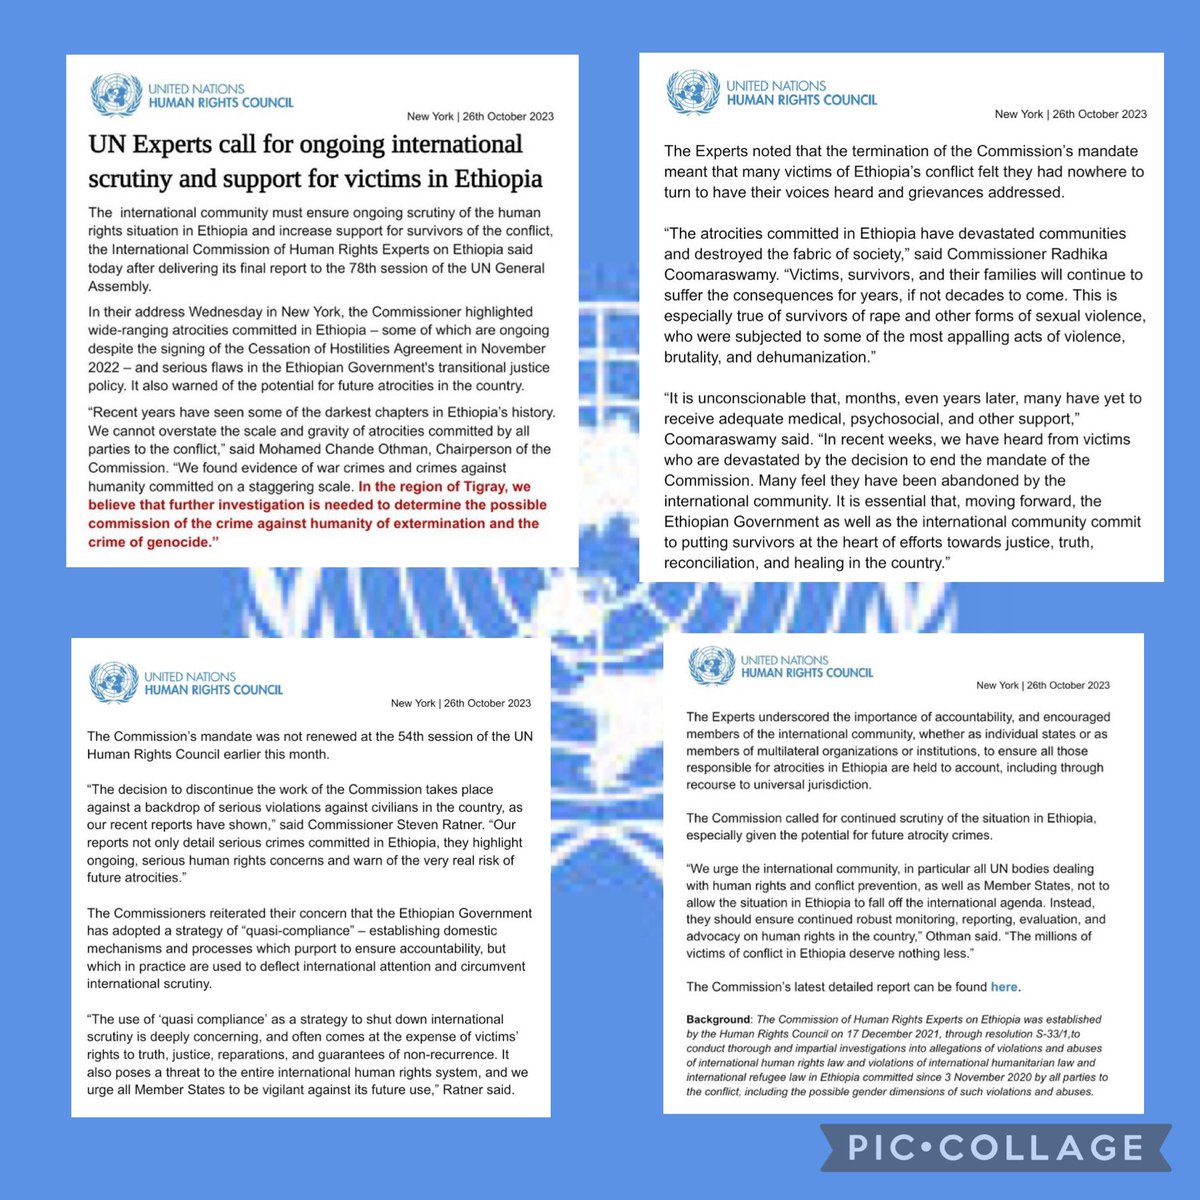 The Commissioner-andserious flaws in theEthiopian Government's transitionaljustice policy. It alsowarned ofthe potential for future atrocities in the country
@ersinrtatar @Statsmin
@MarinSanna
@desitay1
press Ethiopia to #UpholdThePretoriaAgreement #FreeAllTigray from invaders.